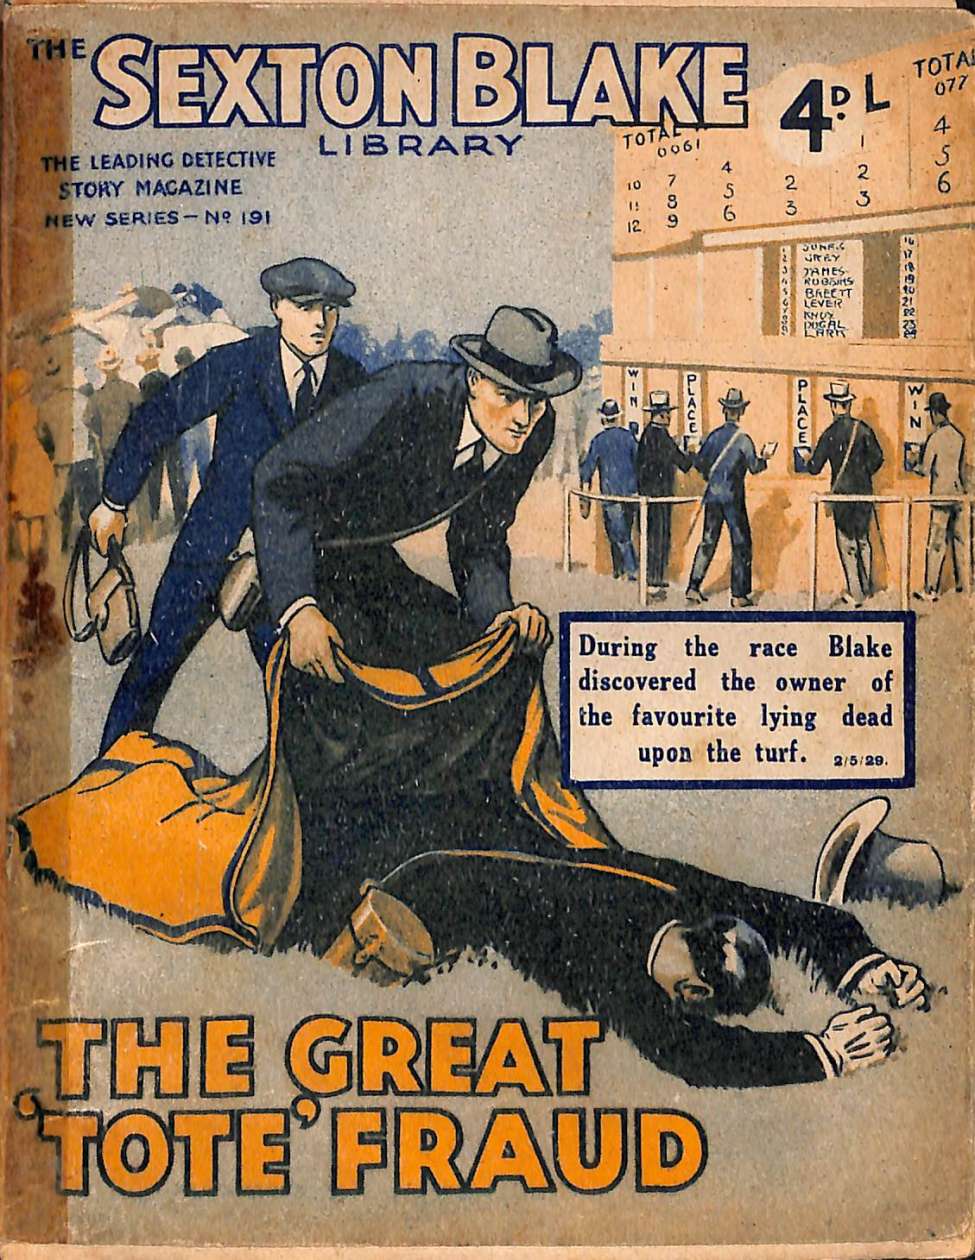 Comic Book Cover For Sexton Blake Library S2 191 - The Great 'Tote' Fraud